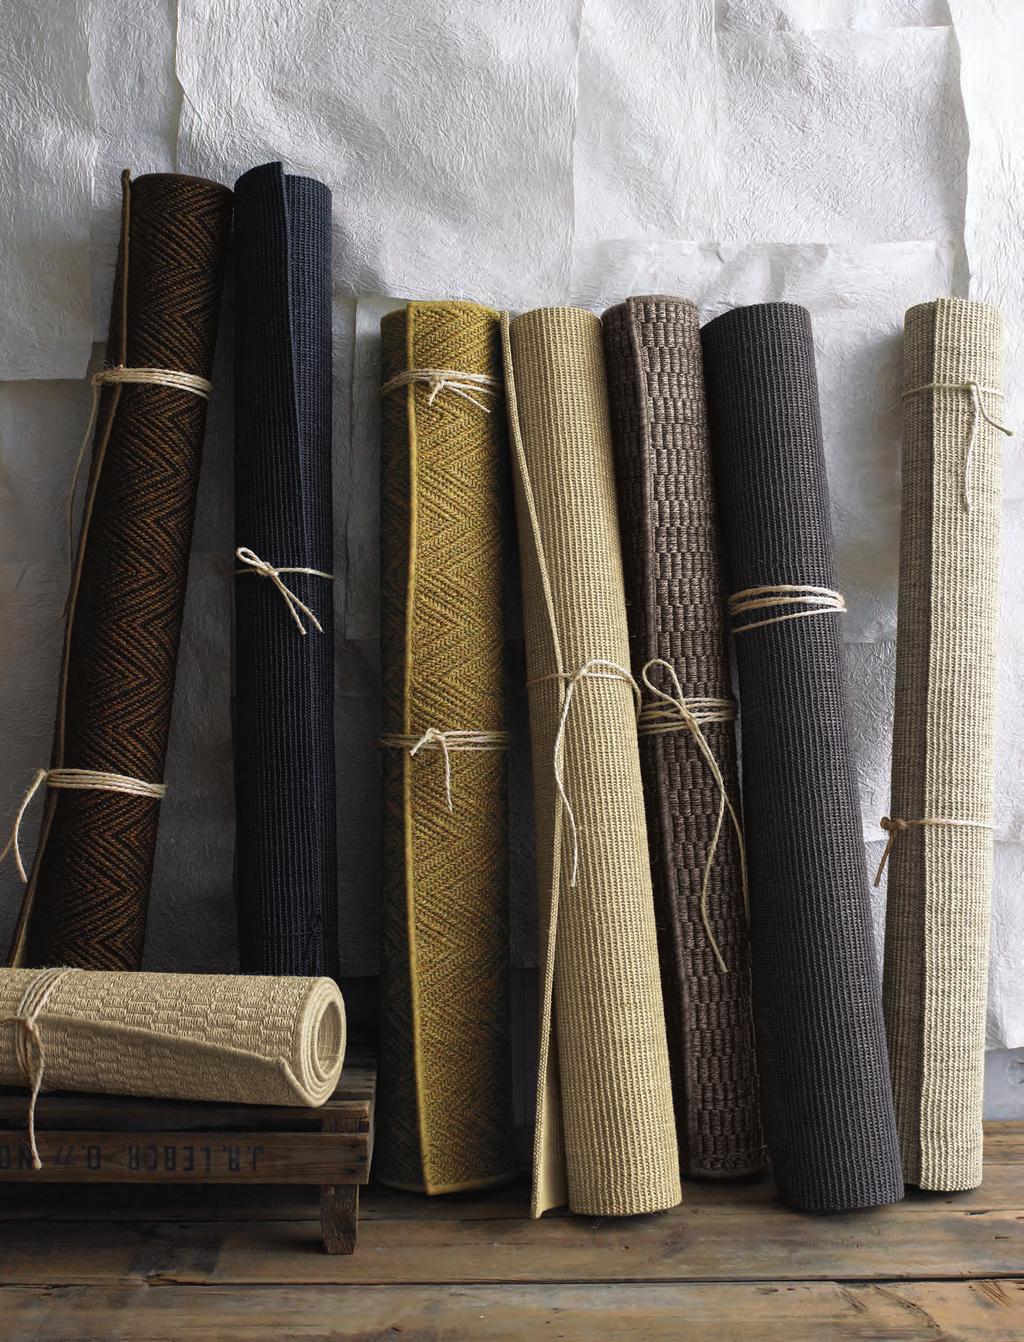 The more important question is where does it all go? sisal Rugs B Linen, Chocolate, Almond or Slate. JK0 x $4. x8 $99. 4 x6 $9. 6 x9 $99. 8 x0 $99. 9 x $99. [ ] timaru baskets B JK Small. 8 dia.